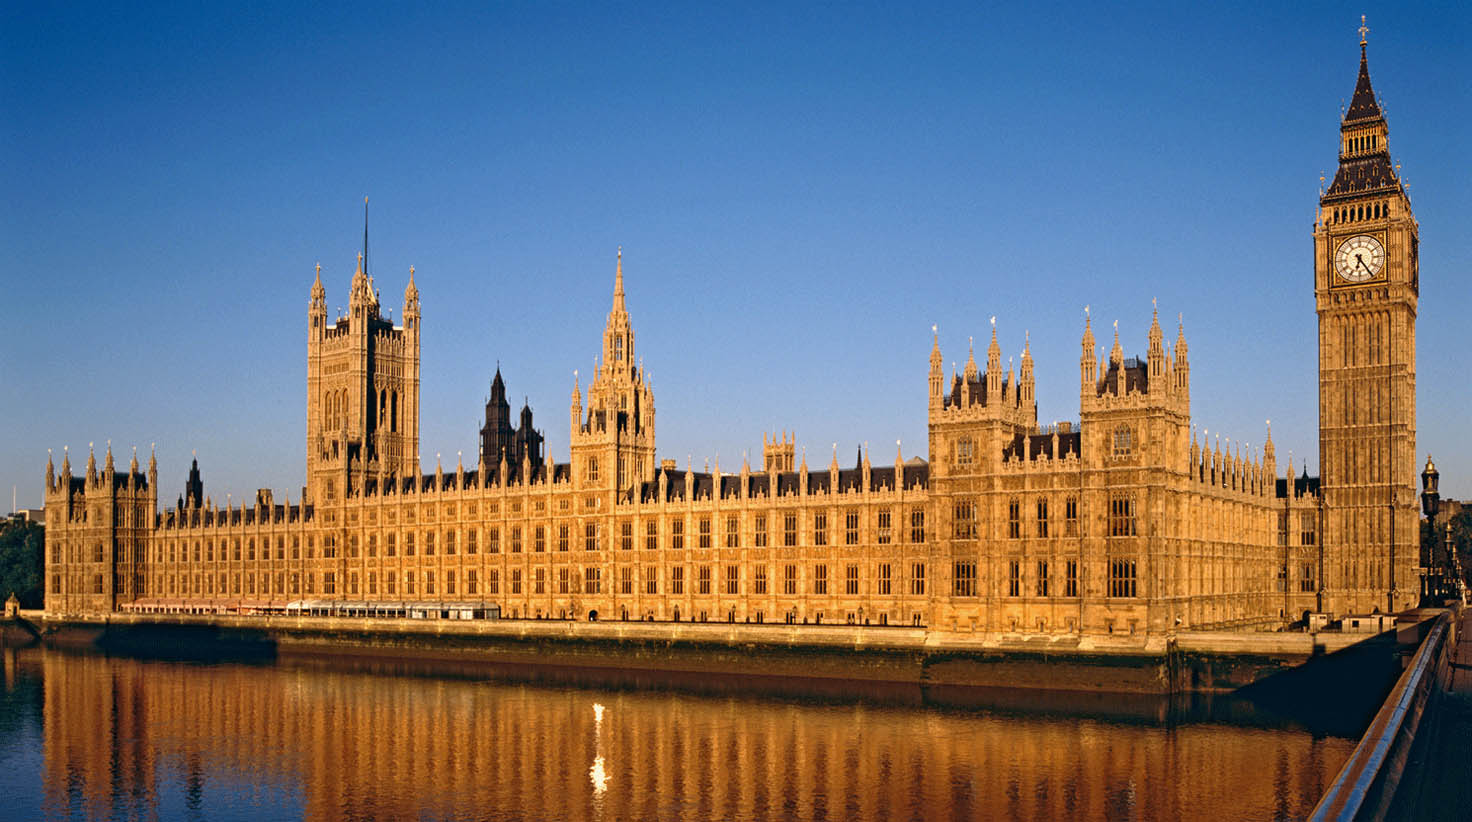 Palace of Westminster (London)